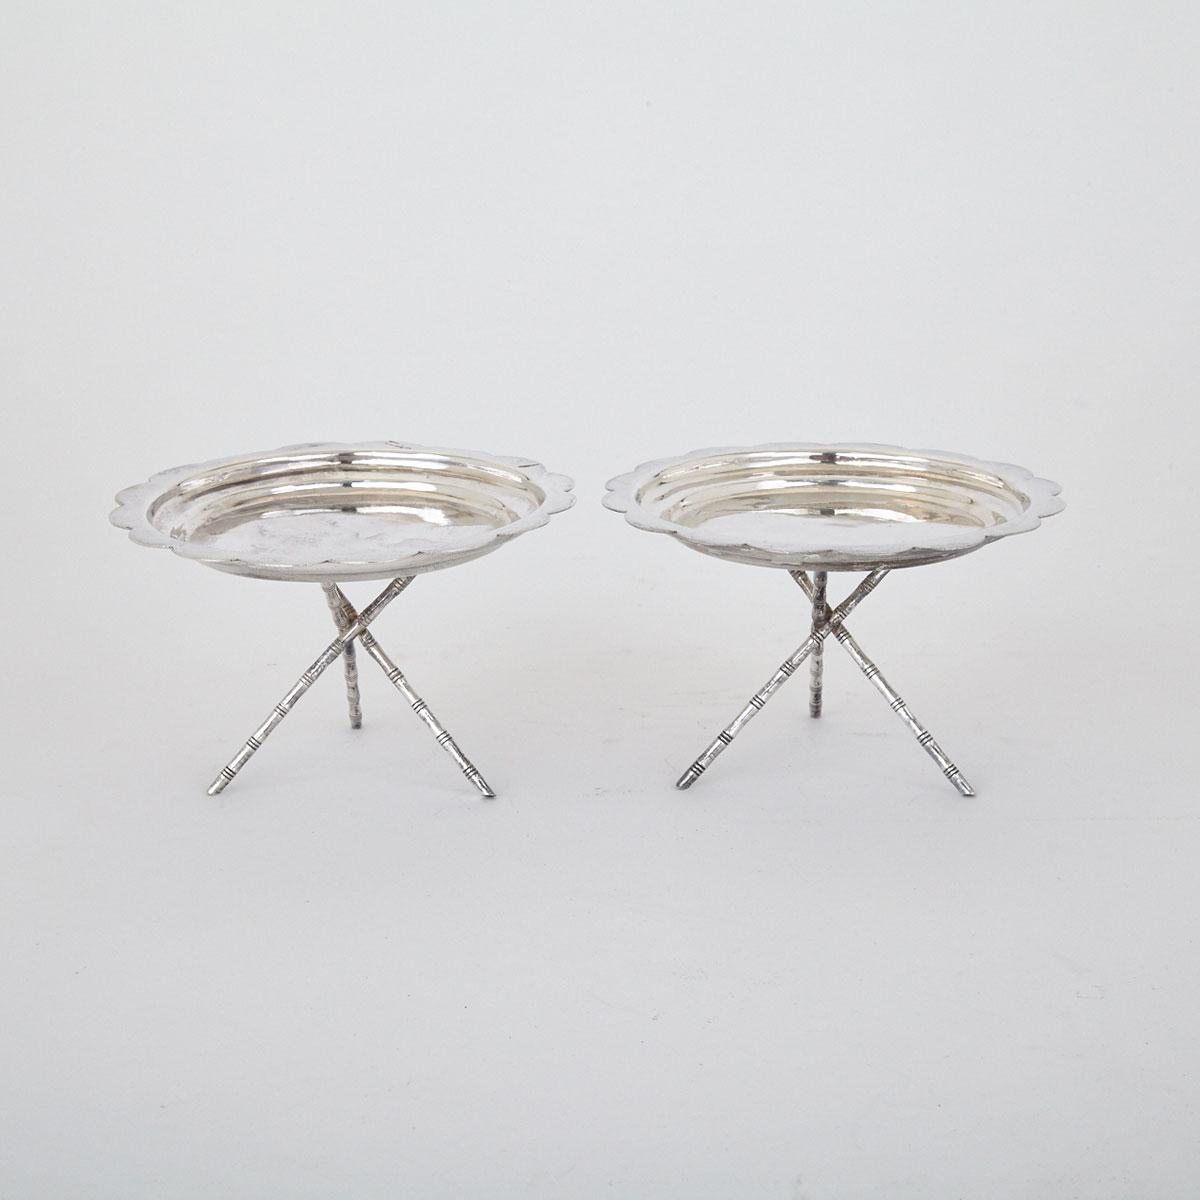 Pair of Export Silver Stands, Circa 1900